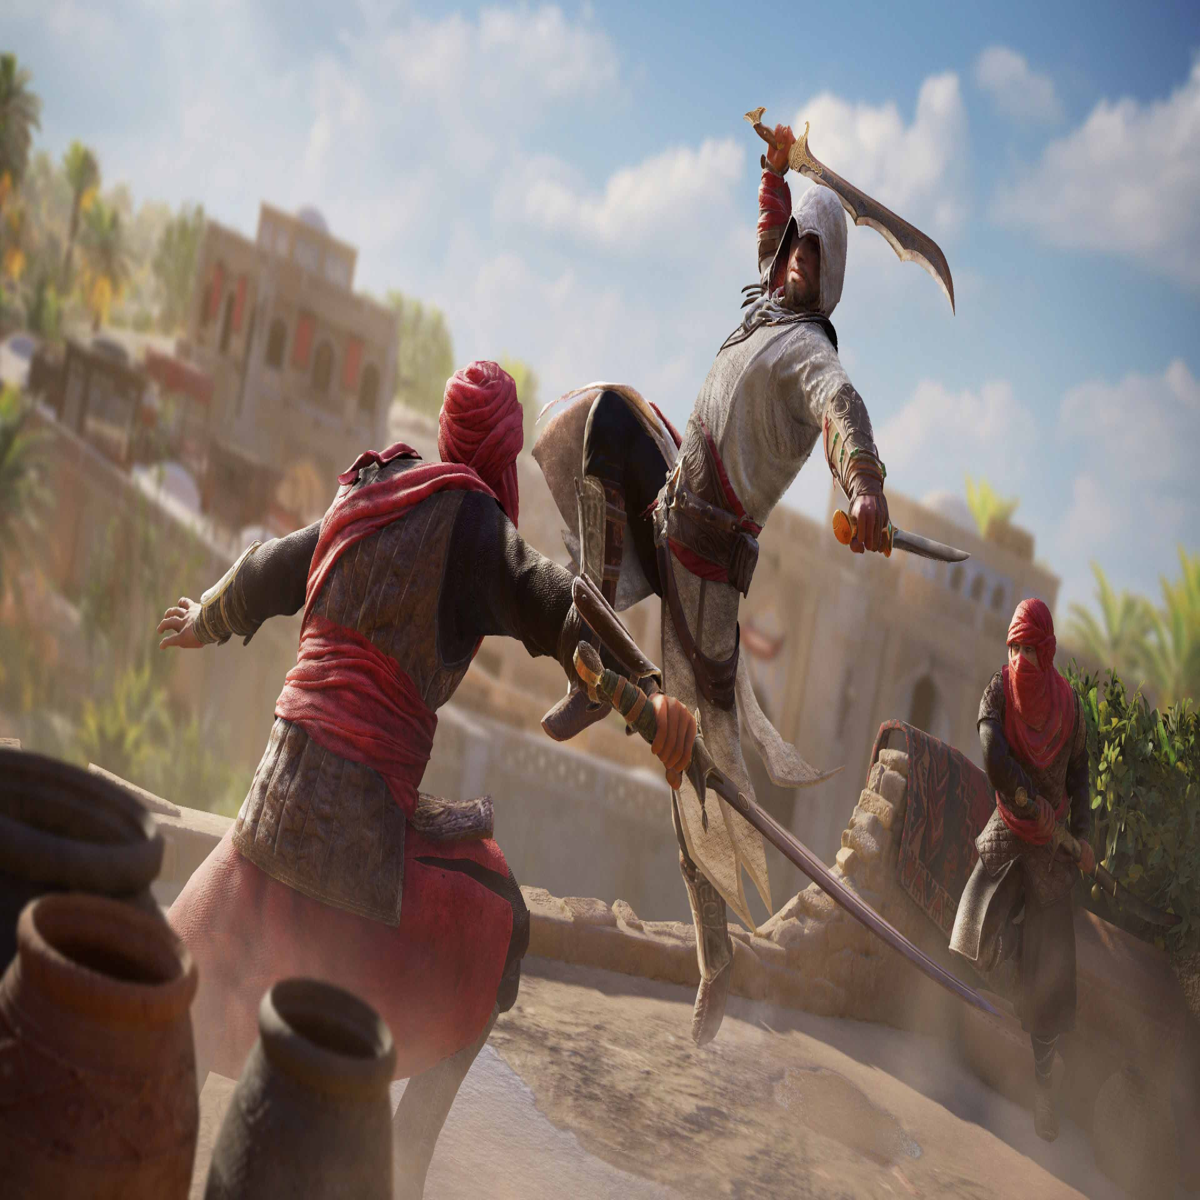 Assassin's Creed Valhalla, Everything we know